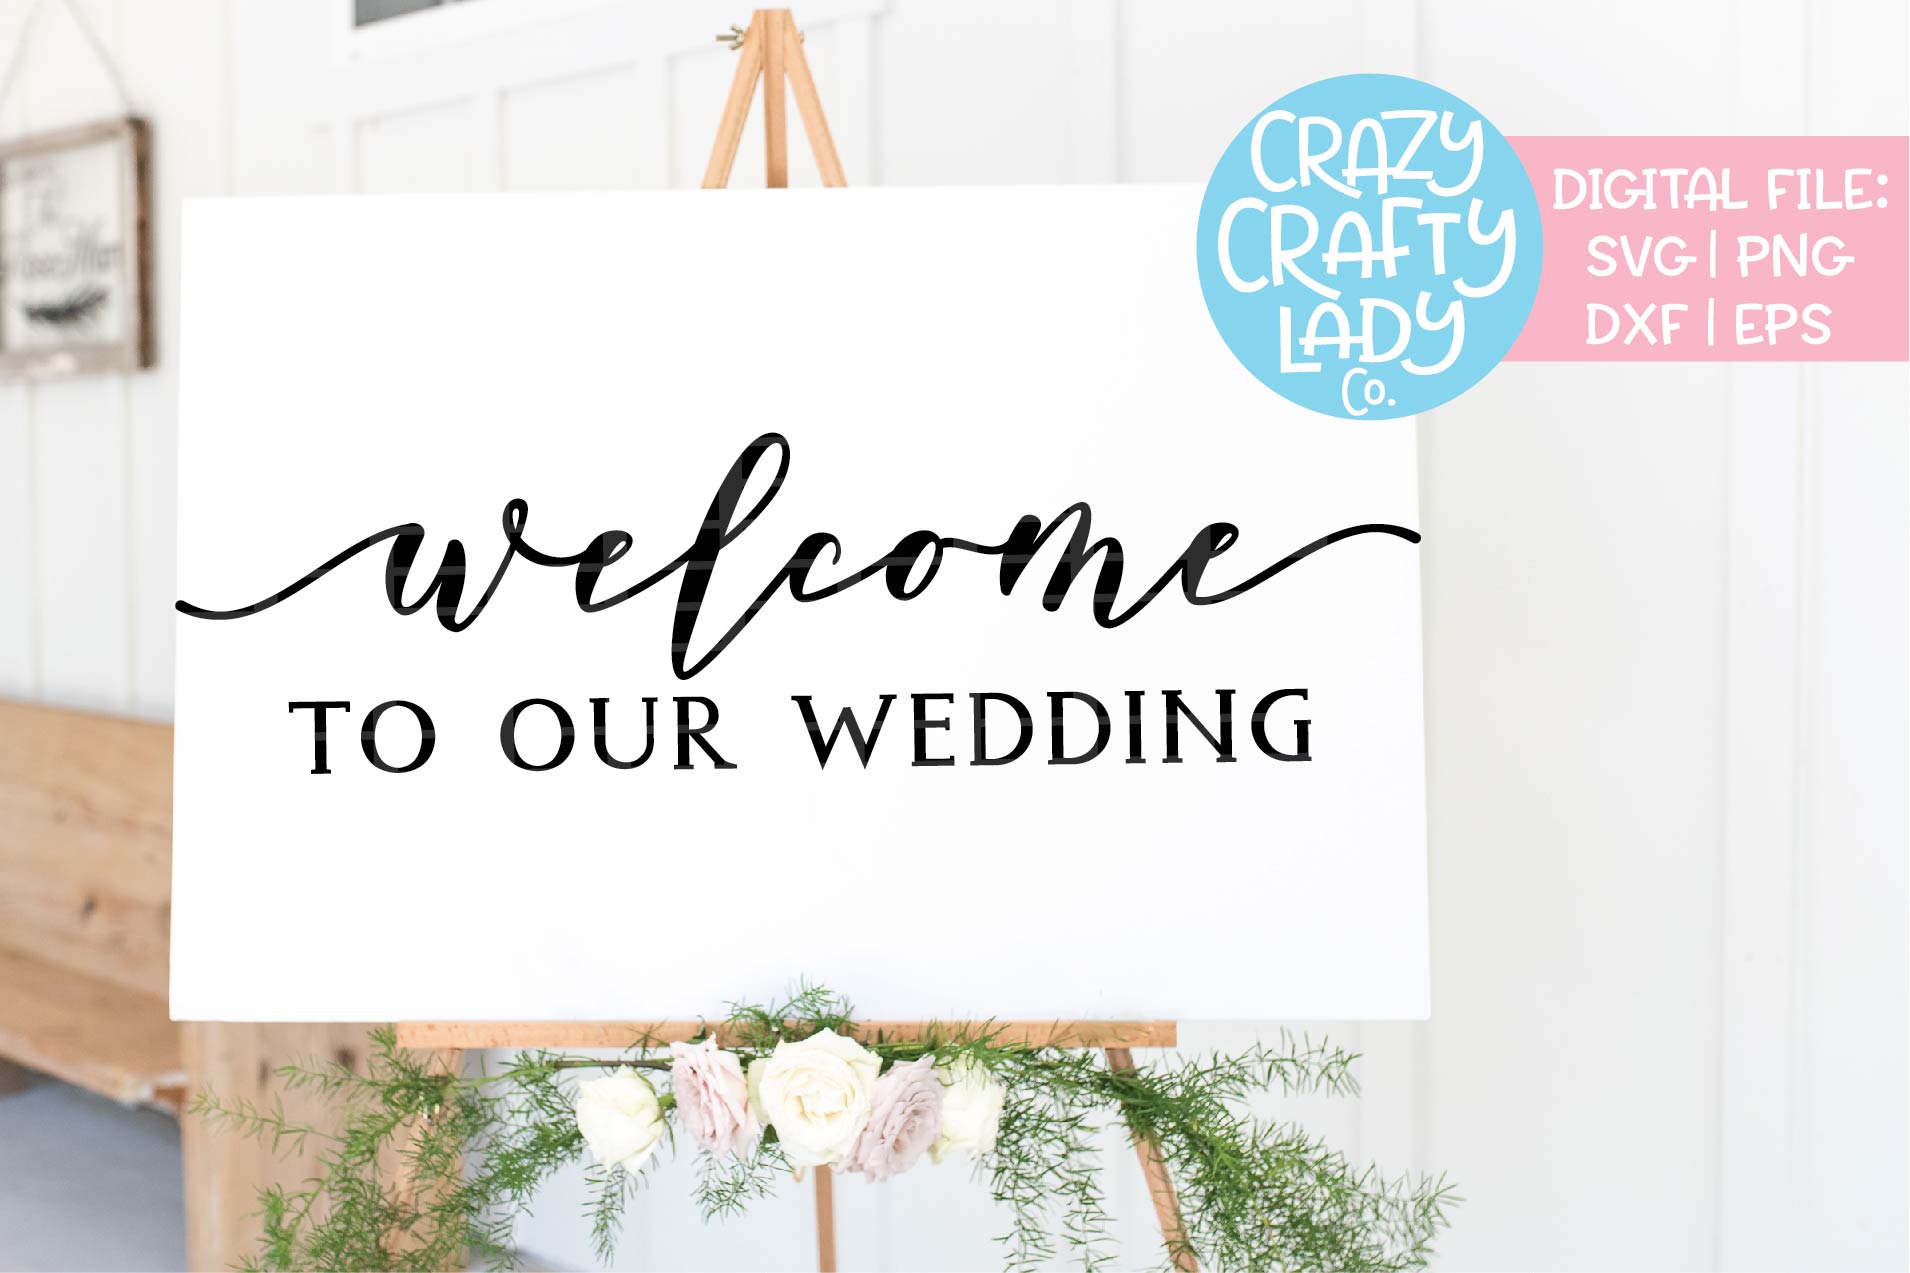 to Our Wedding SVG DXF EPS PNG Cut File